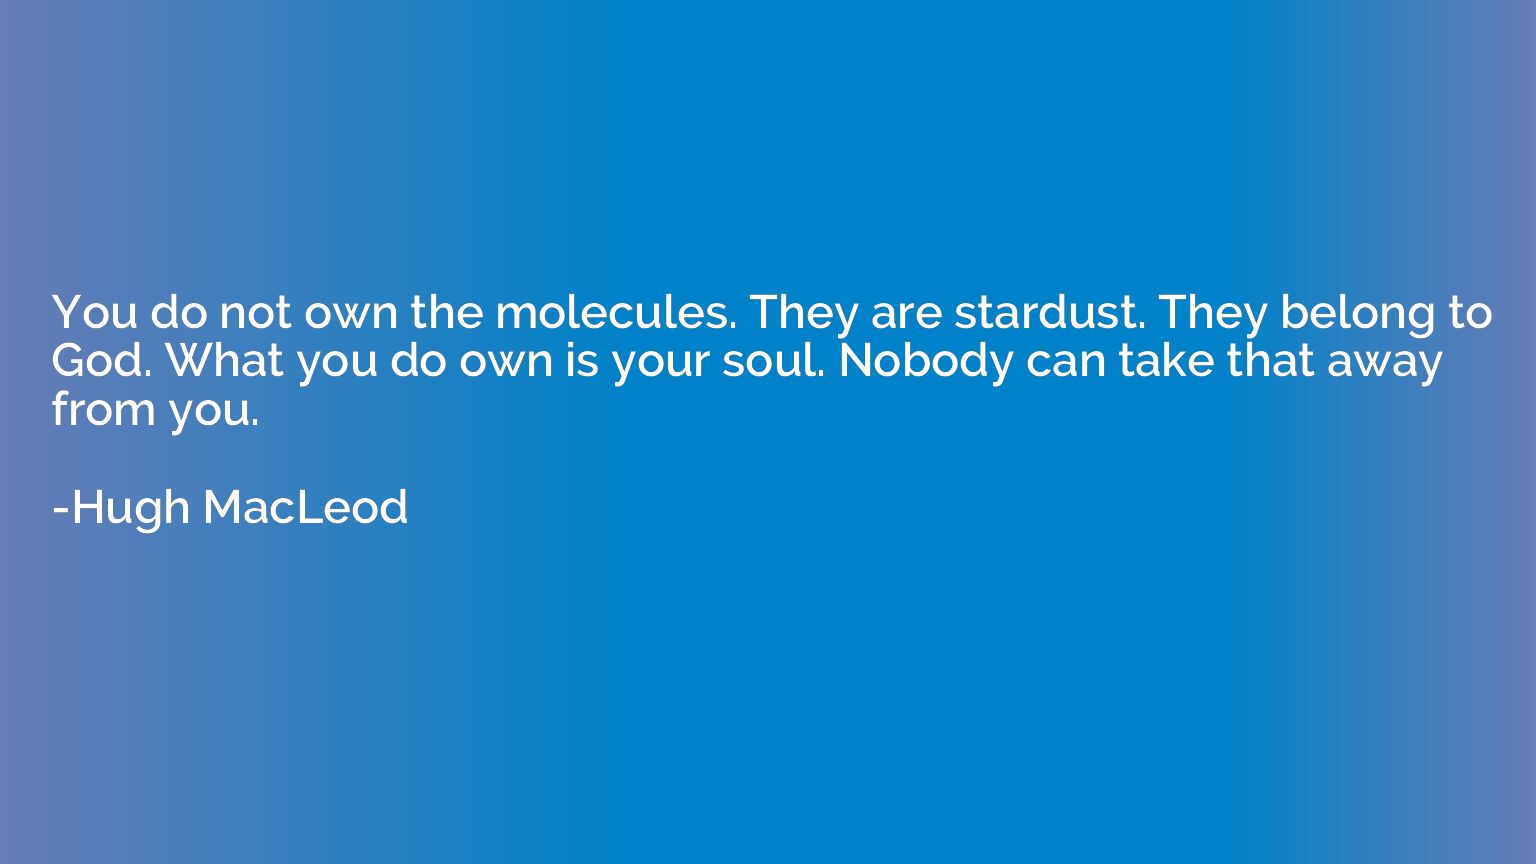 You do not own the molecules. They are stardust. They belong